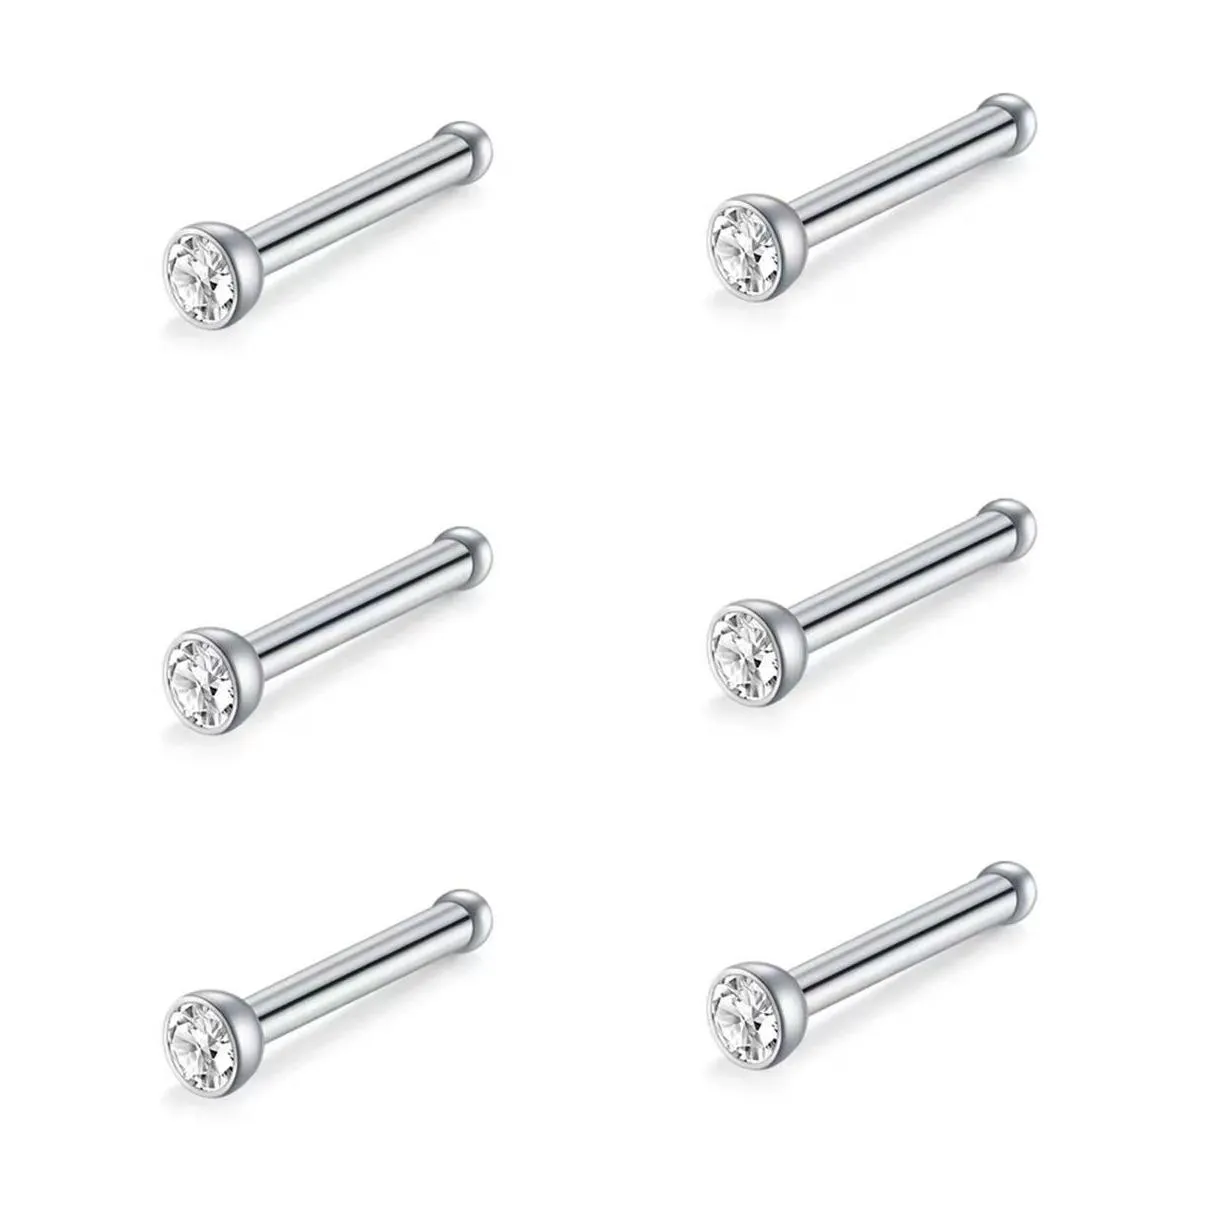 30pcs 316 stainless steel L rod, S rod, straight rod inlaid with 3mm rhinestone trend nose stud fashion men and women wear accessories